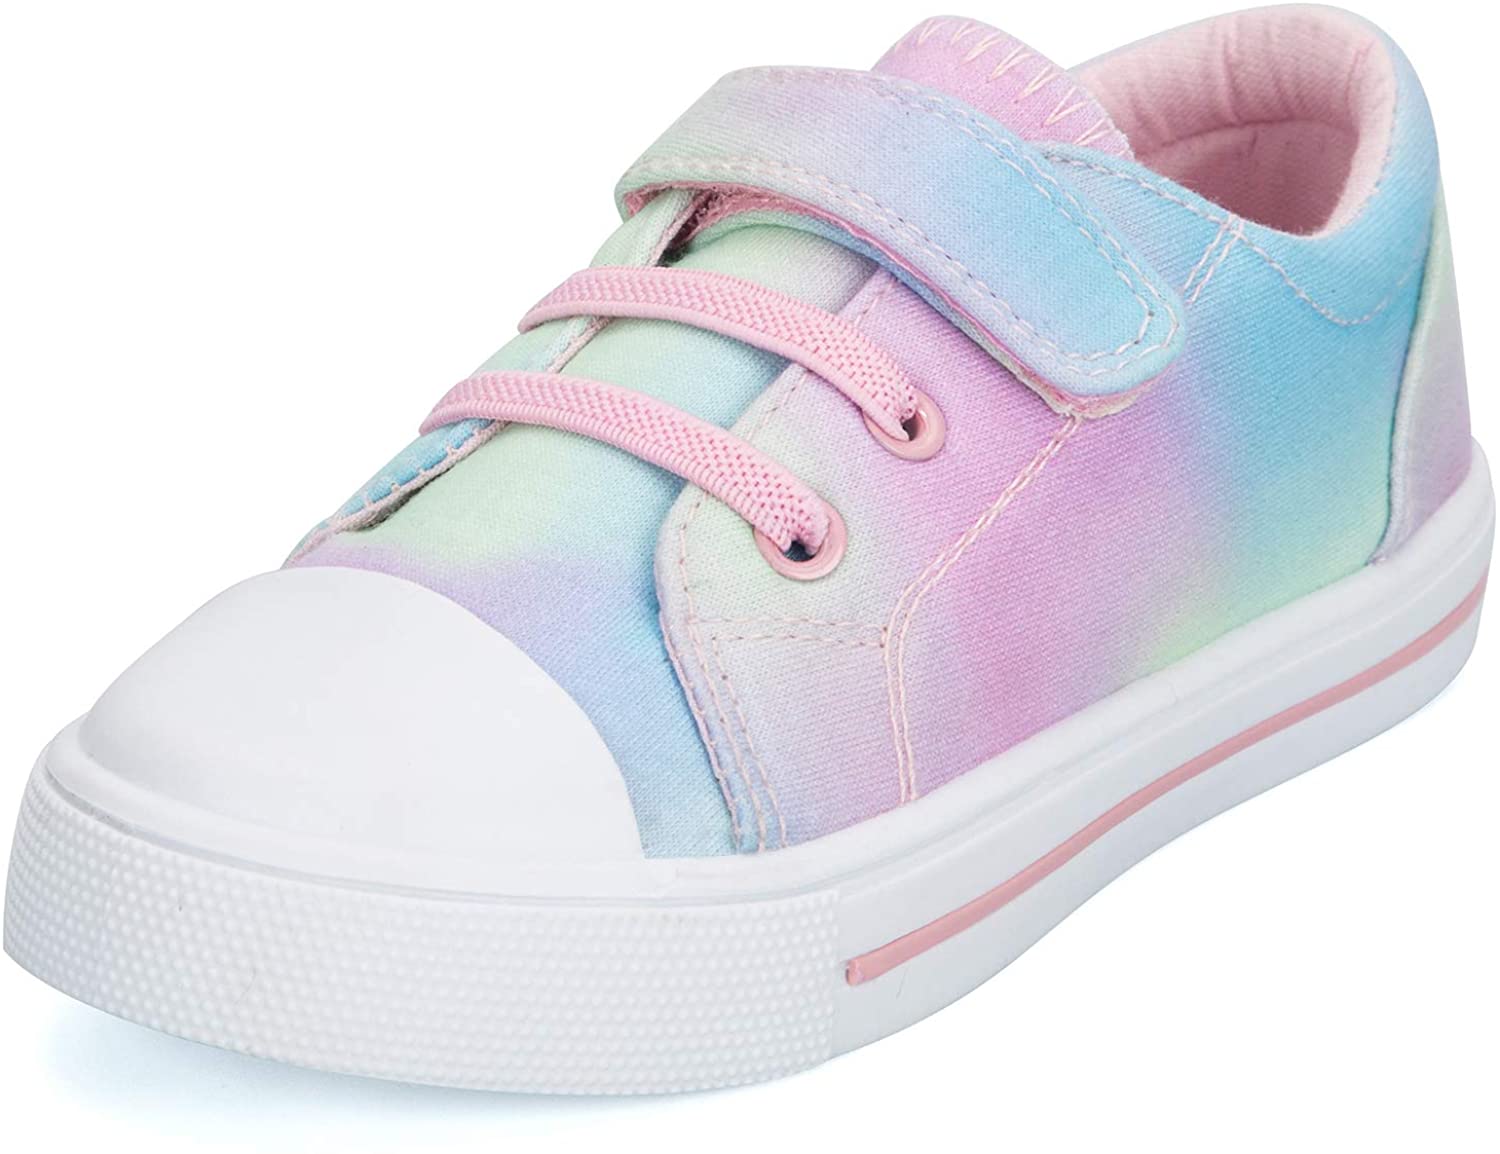 Kids Toddler Canvas Shoes Sneakers Colorful - KKOMFORME